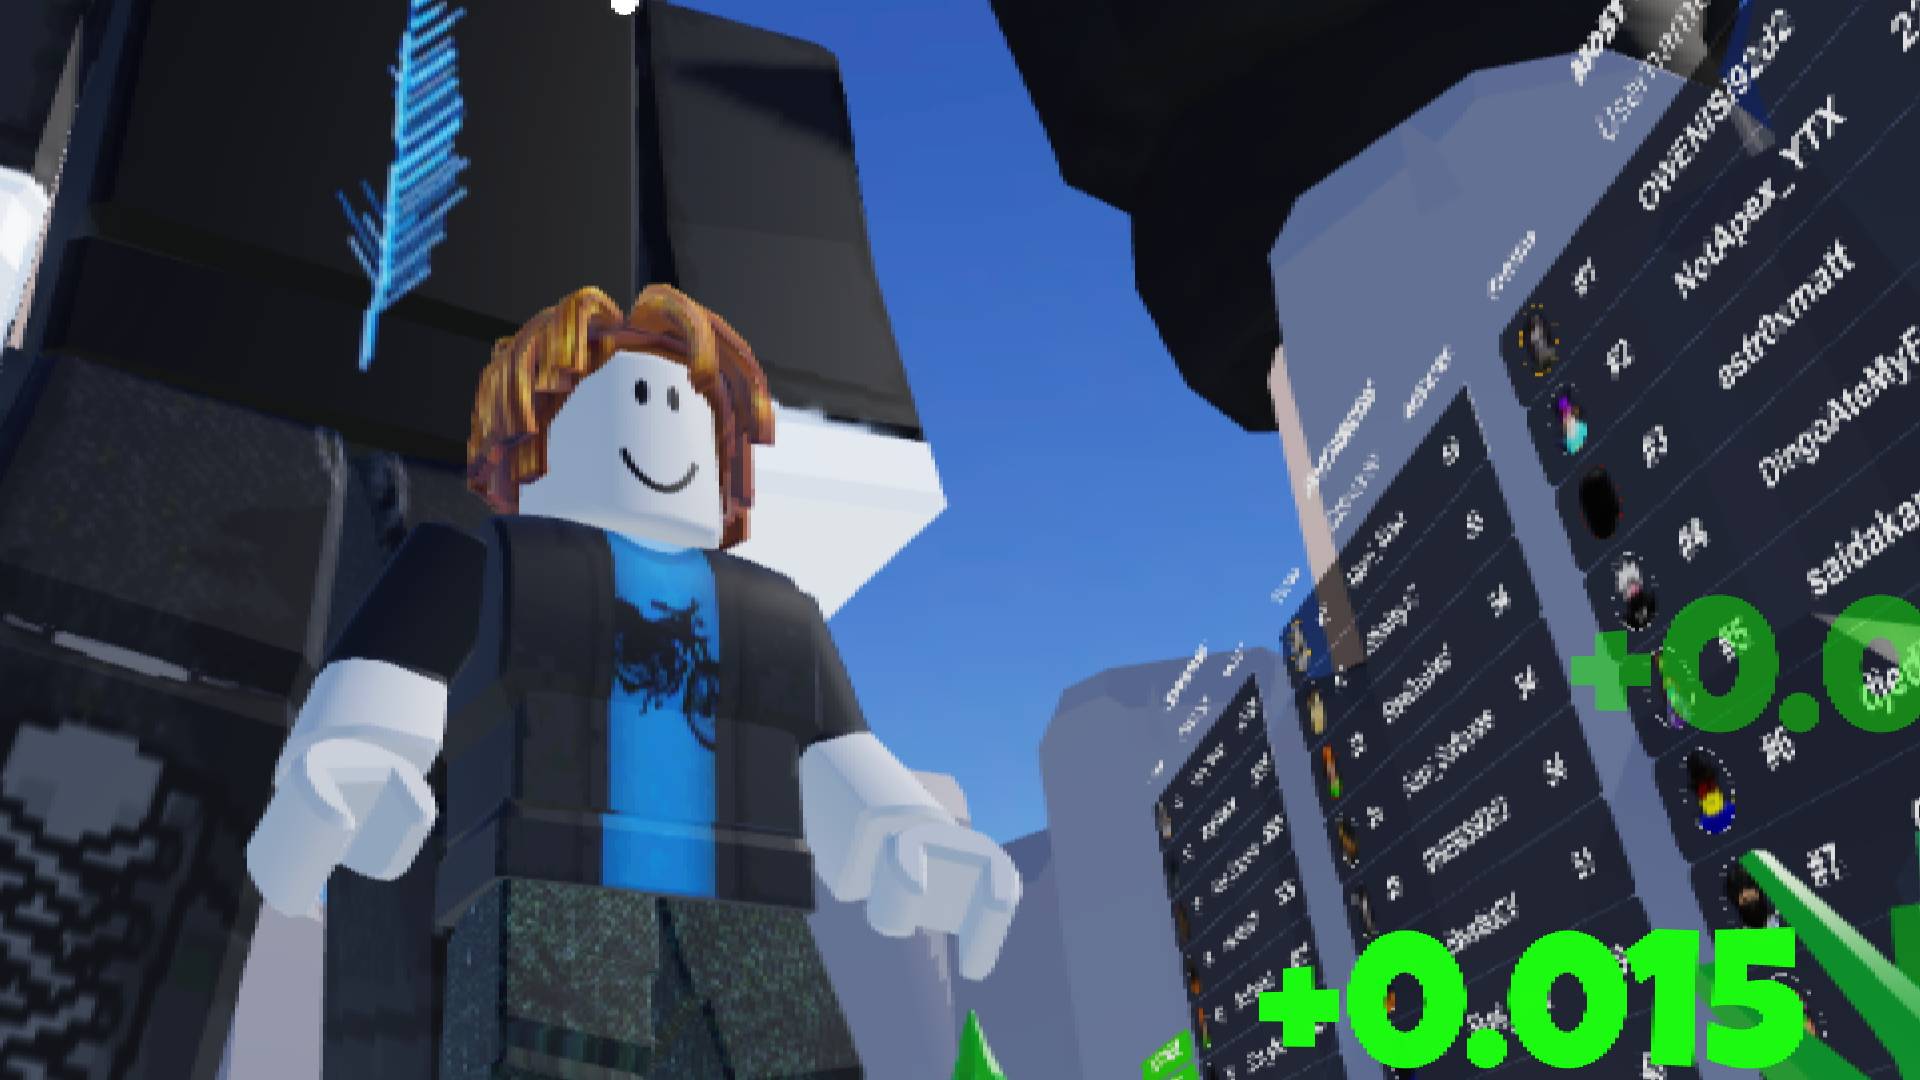 2022) **NEW** ✨ Roblox Anime Power Tycoon Codes ✨ ALL *RELEASE* CODES! 